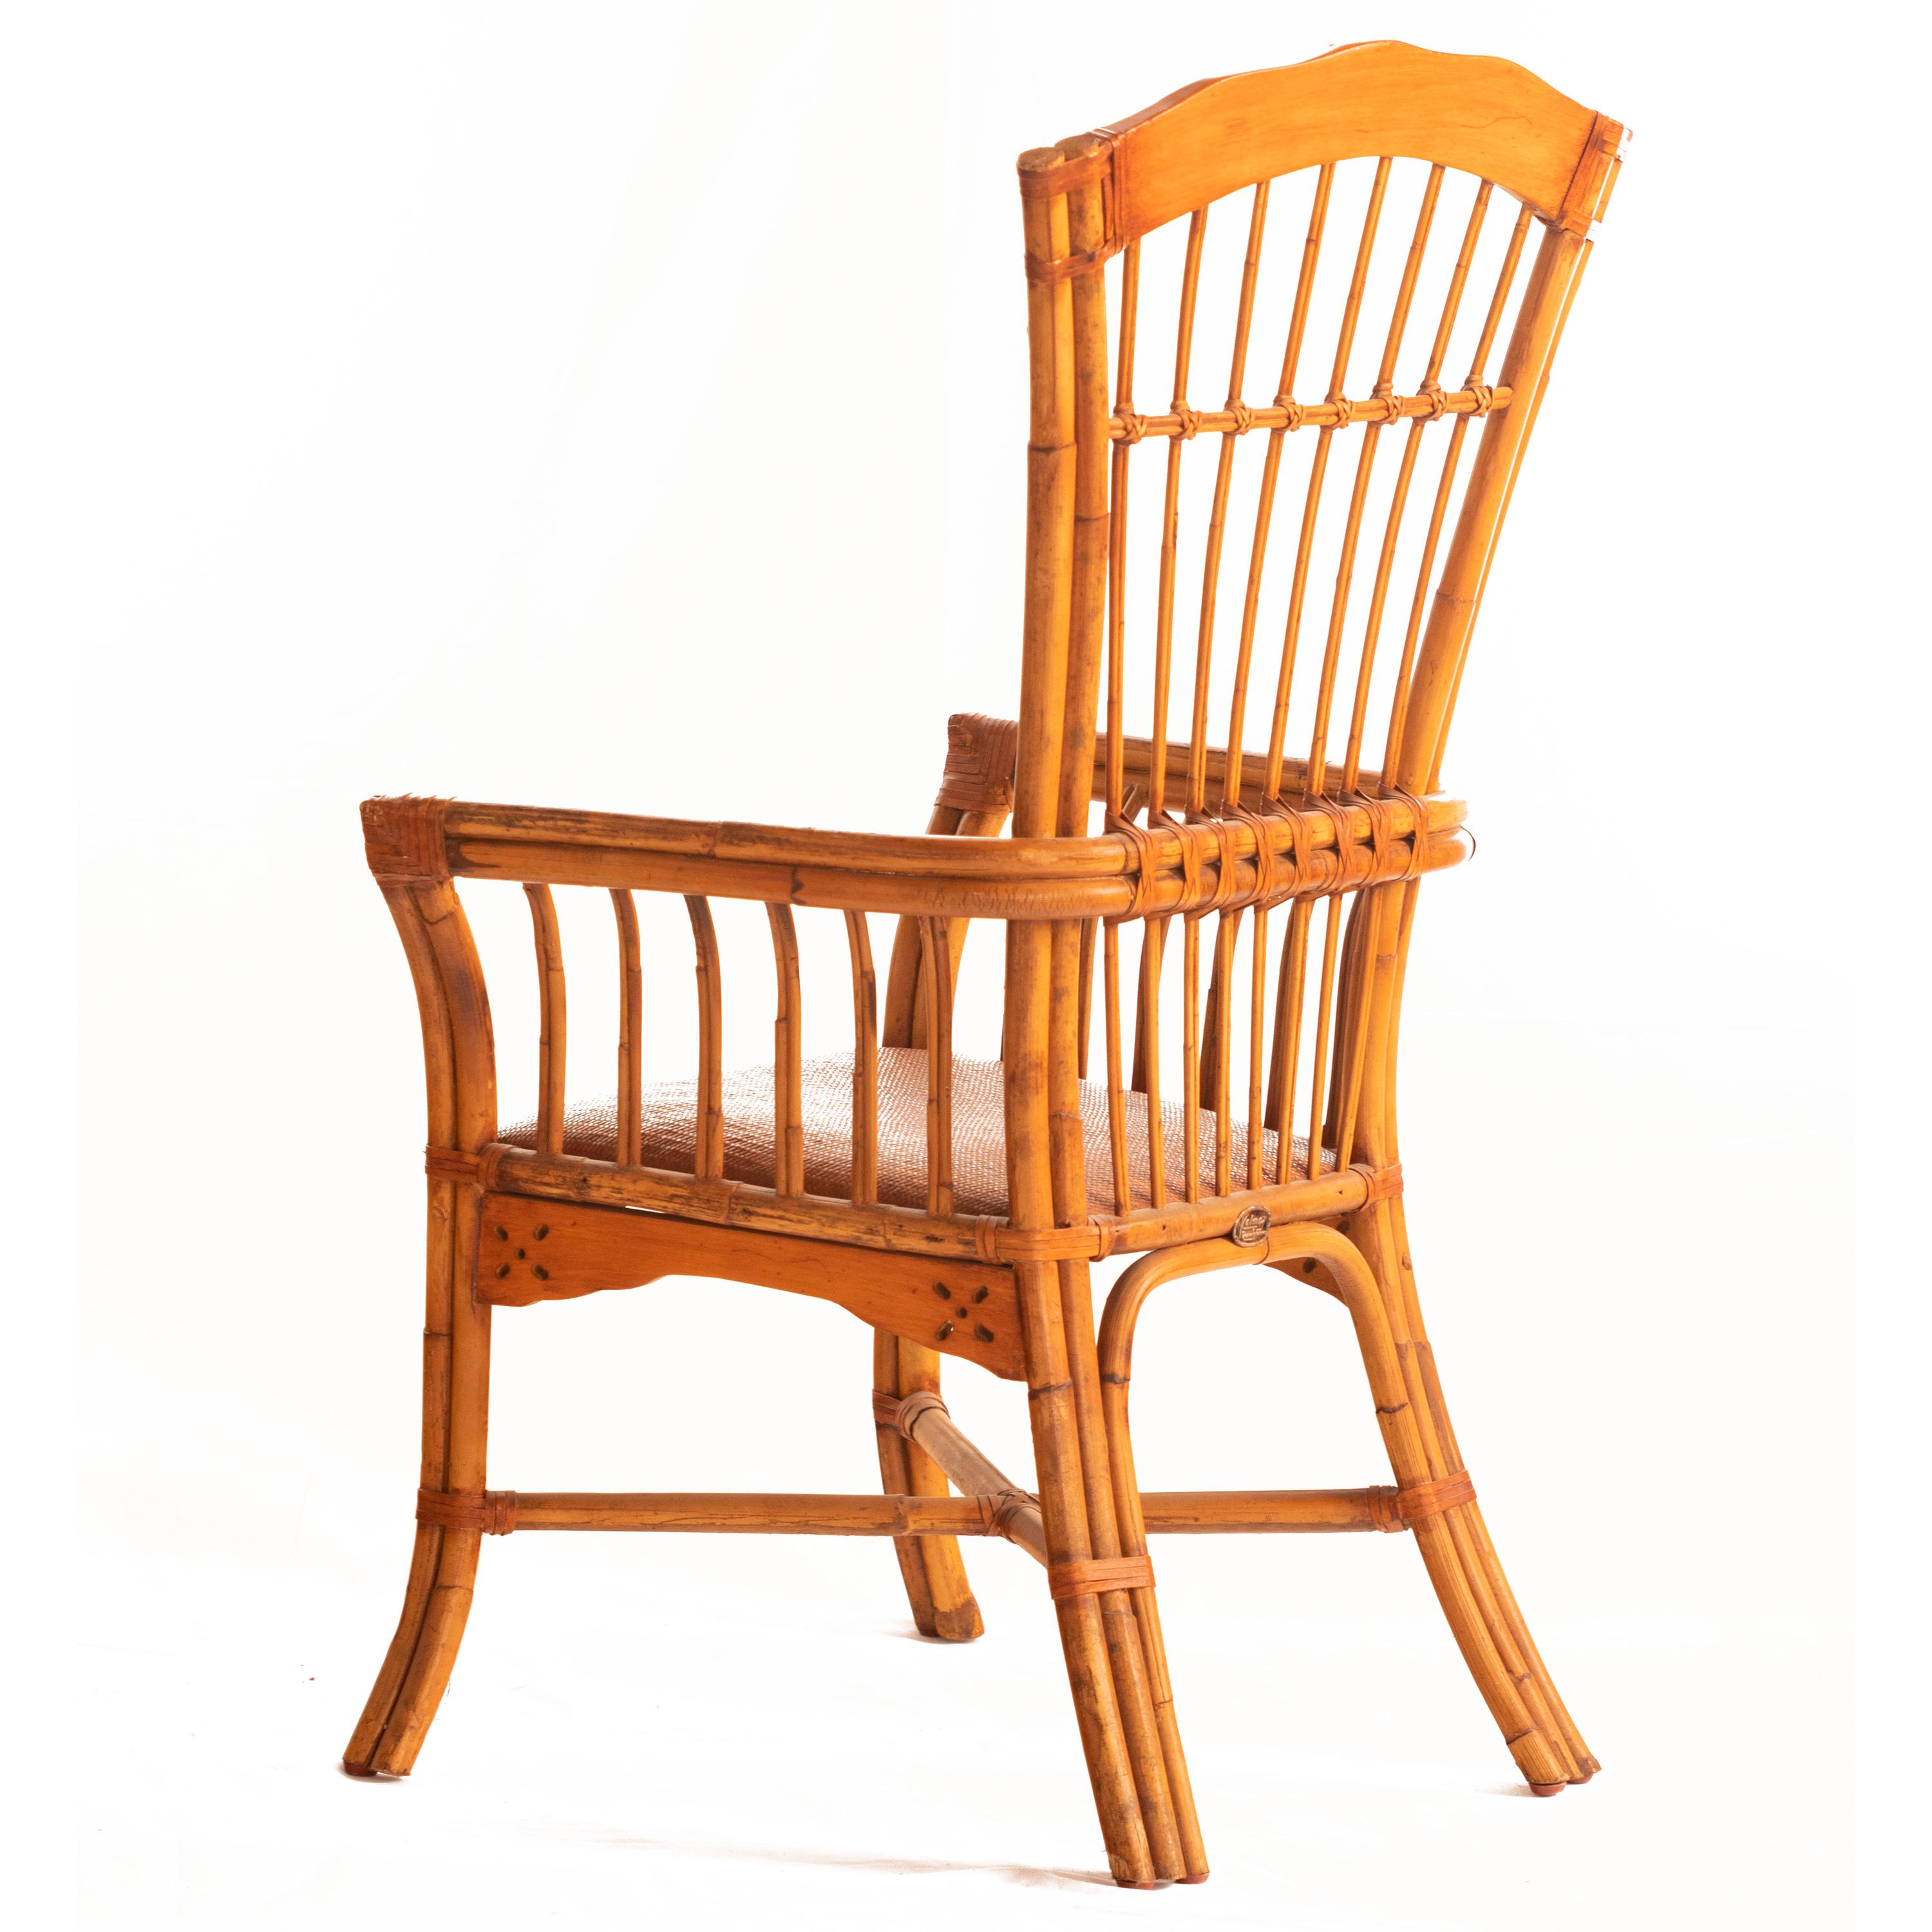 Chinese Export Rattan Woven Cane Handmade Seat Armchair Kalma Modern Confortable Furniture For Sale